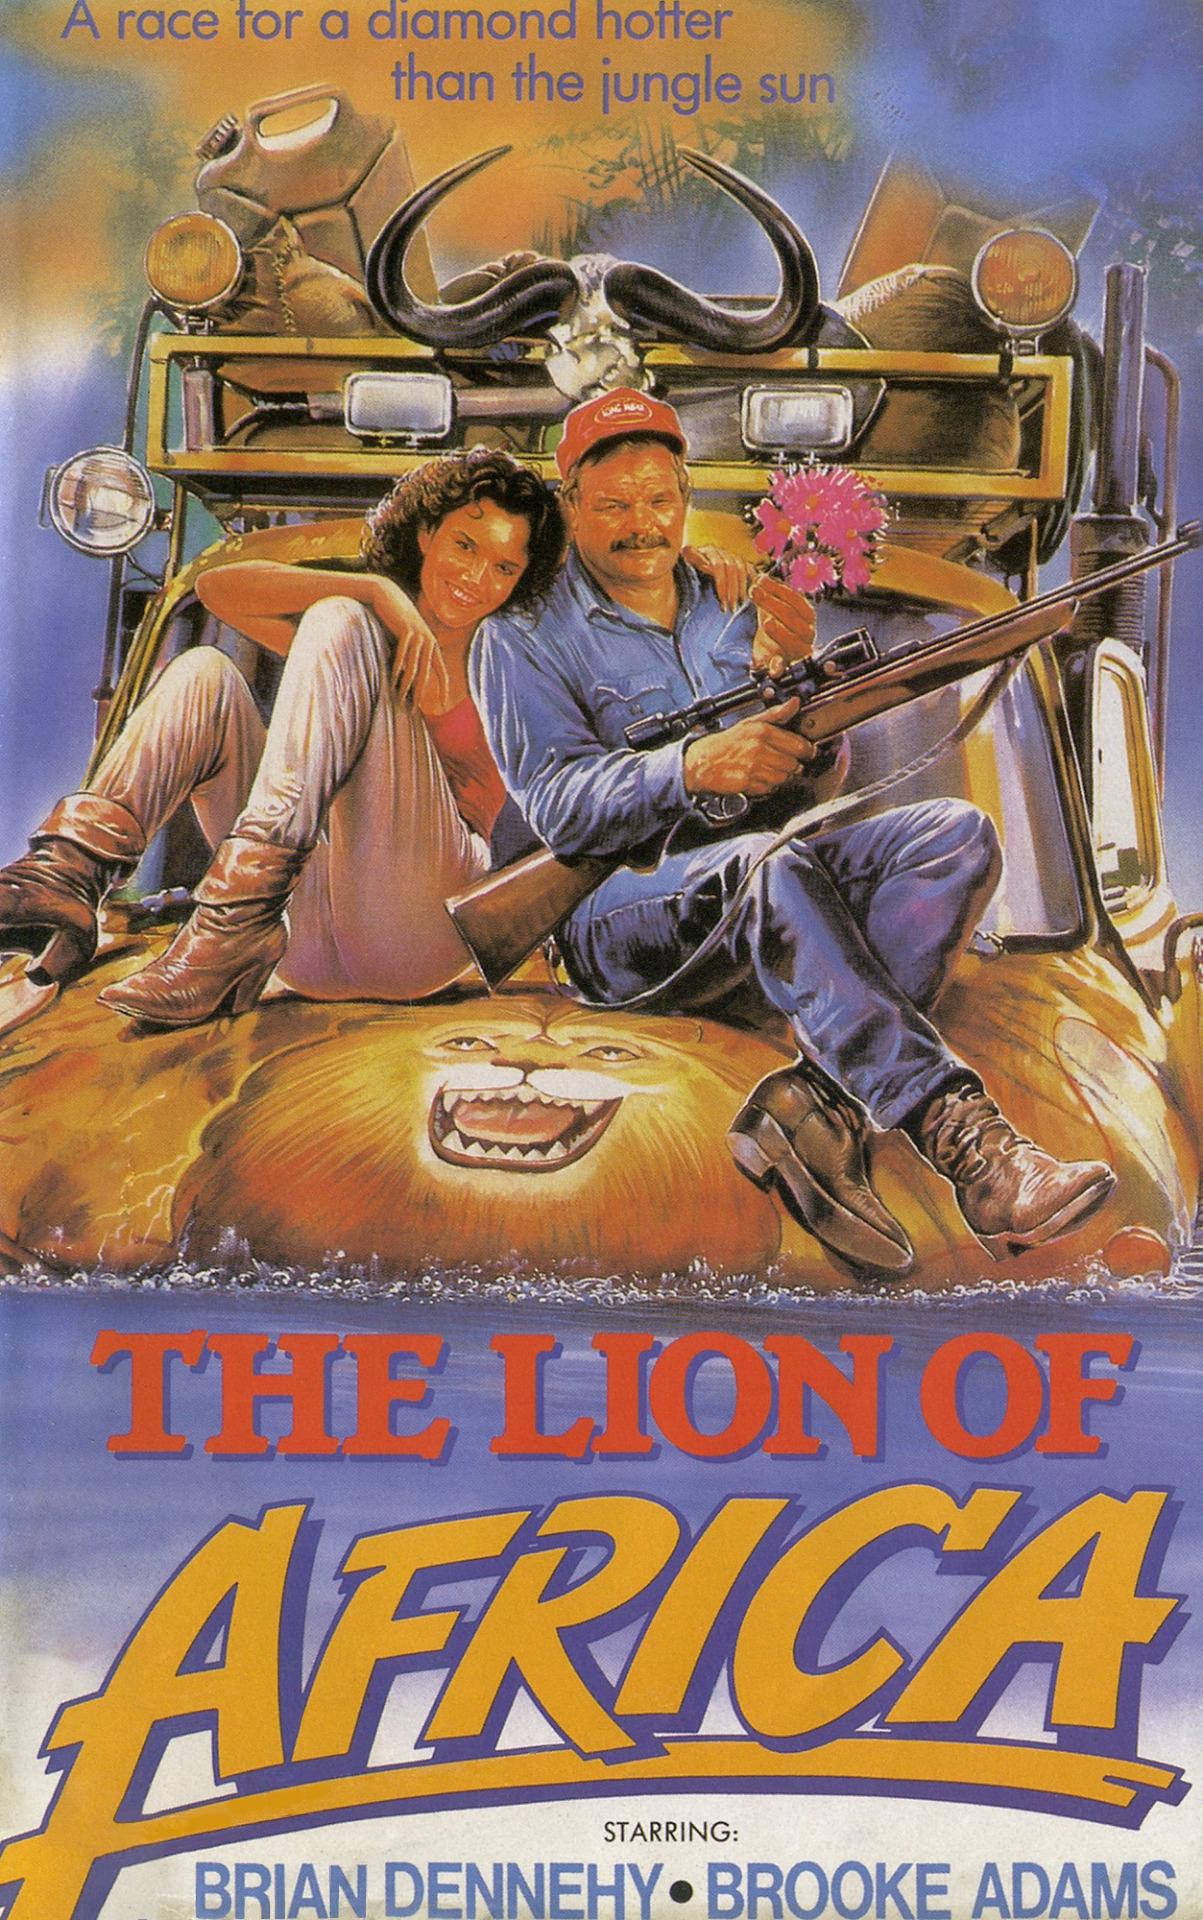 The Lion of Africa (1988) starring Brian Dennehy on DVD on DVD